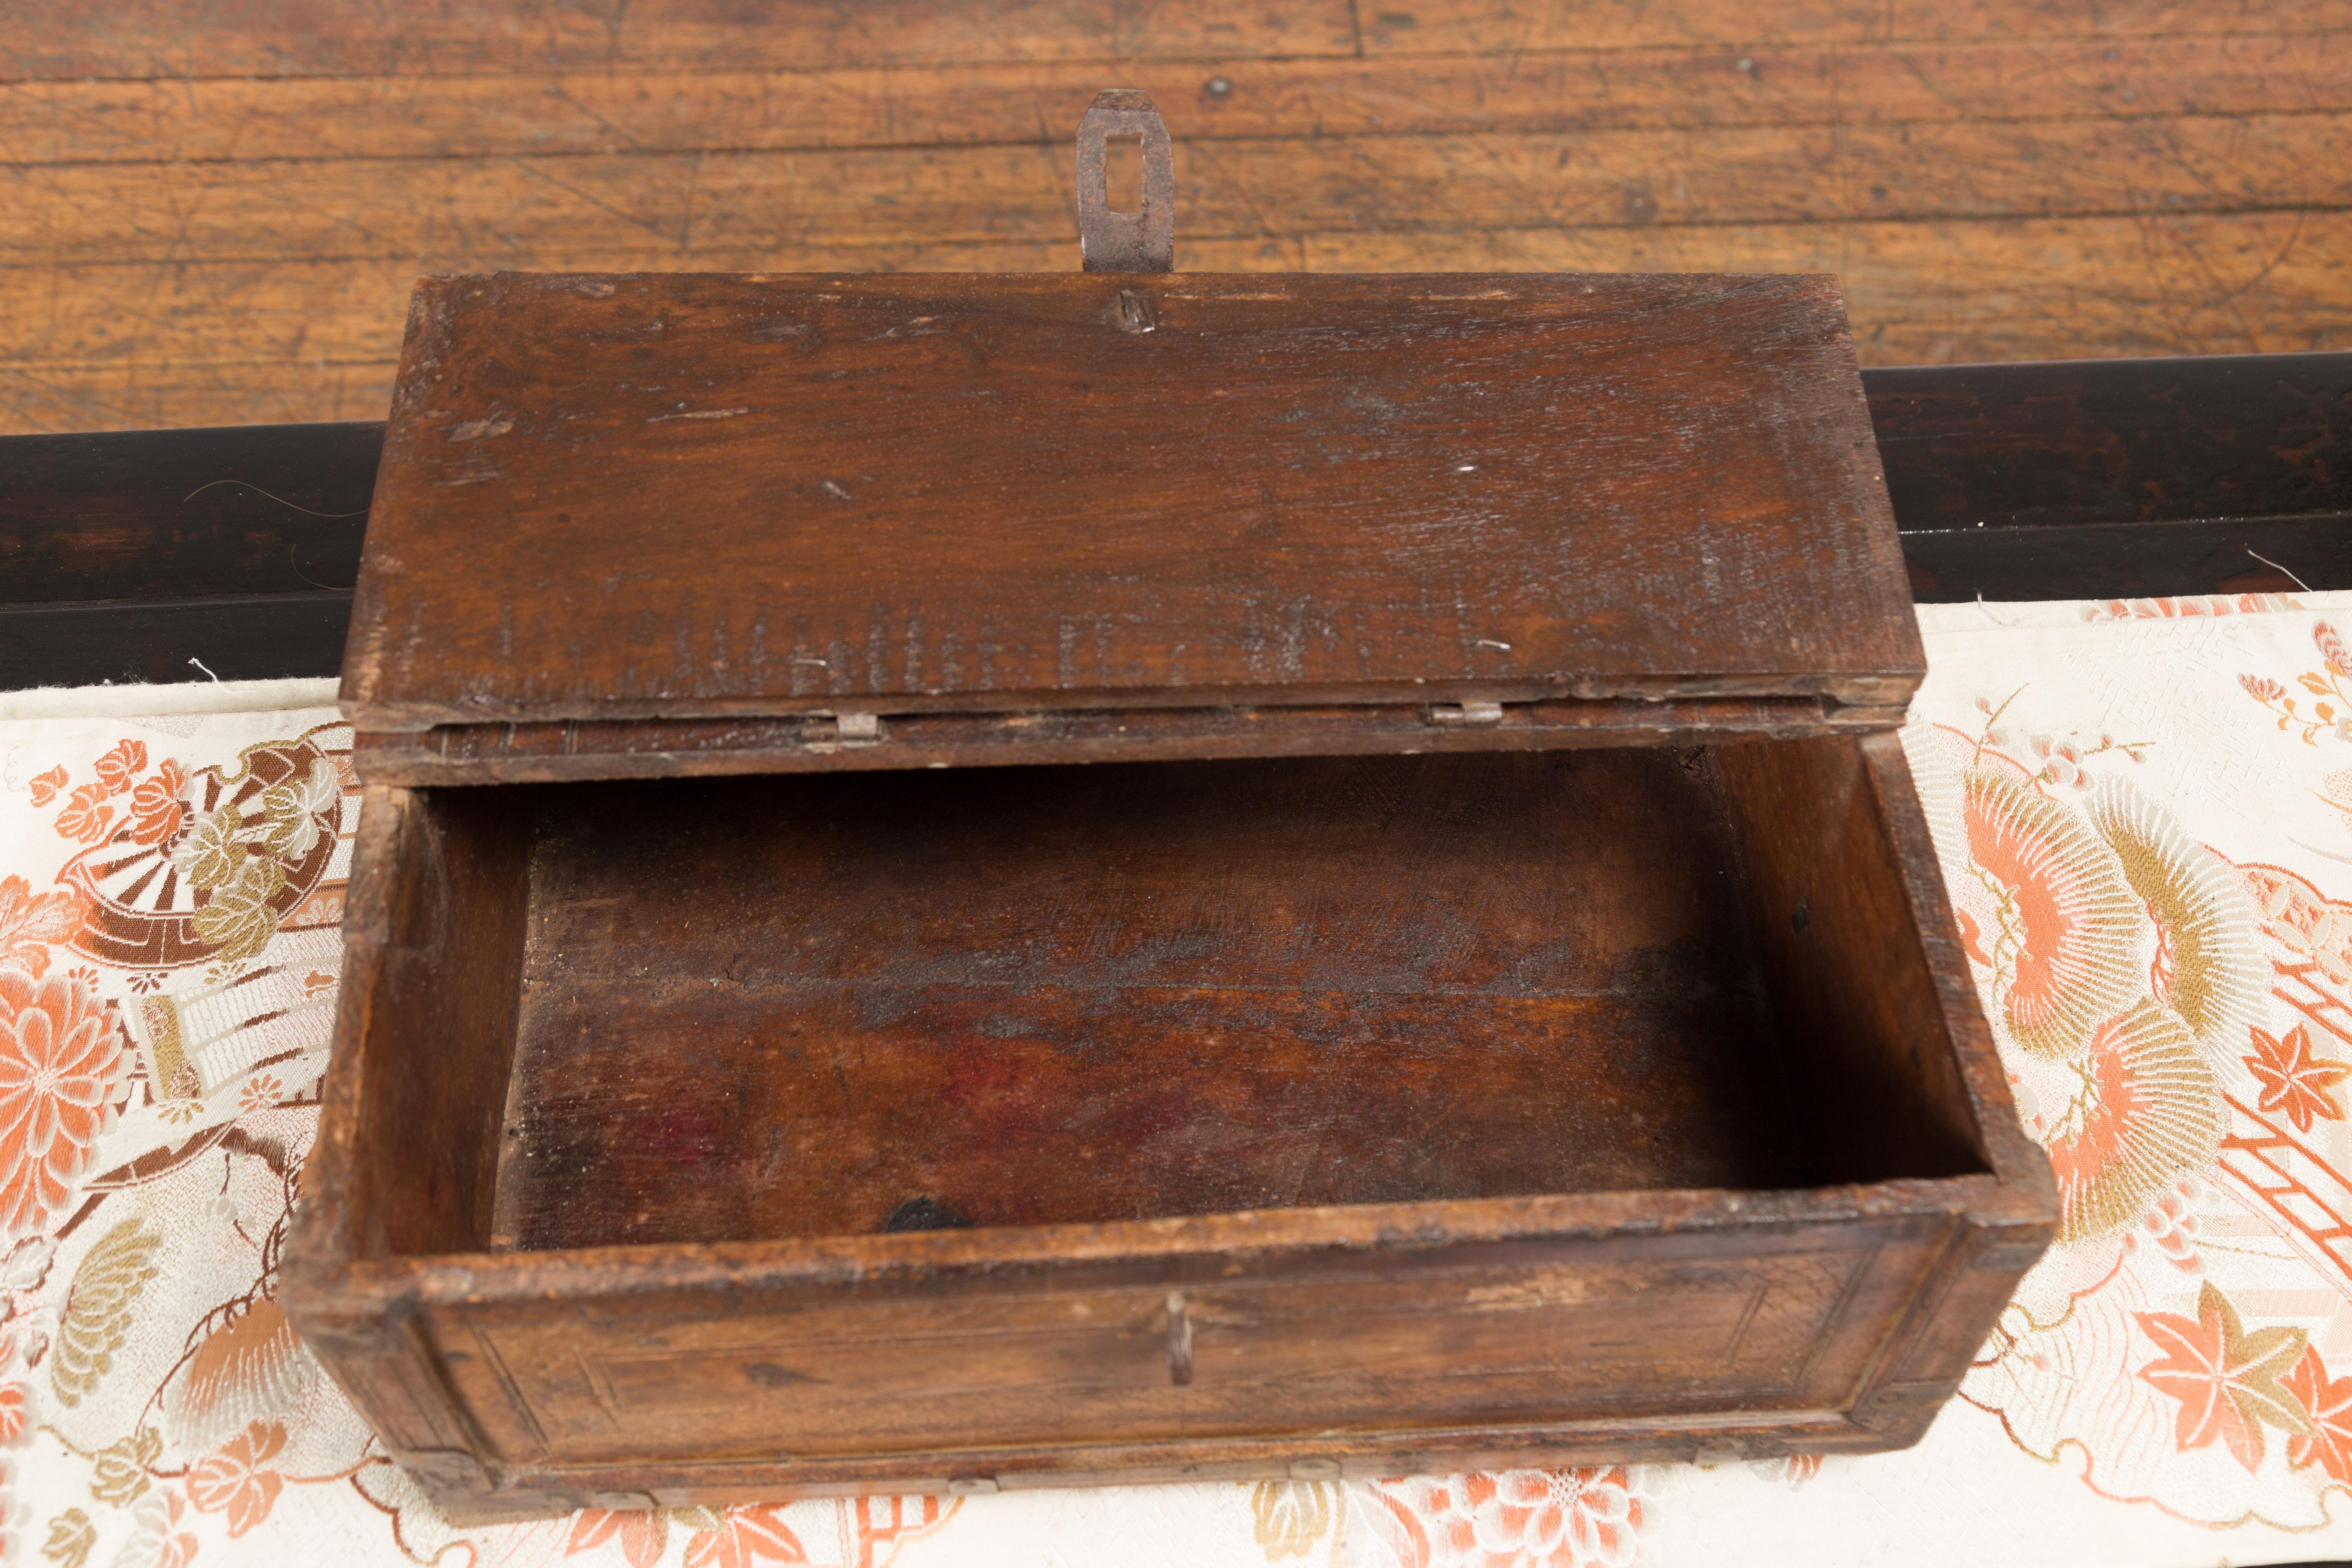 Carved 19th Century Indian Wooden Box with Incised Motifs and Distressed Patina